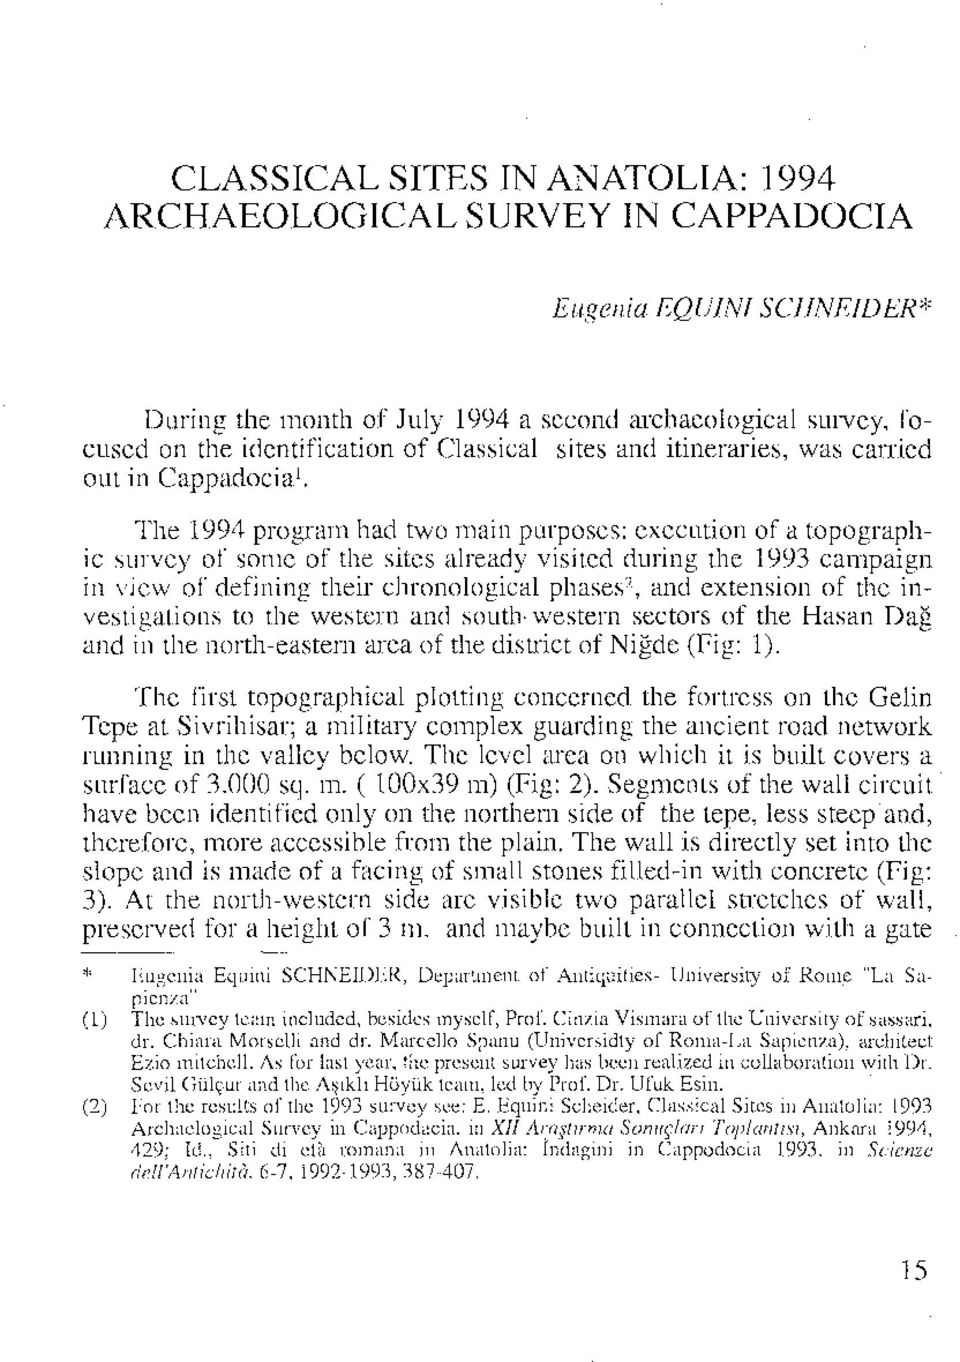 The 1994 program had two main purposes: execution of a topographic survey of some of the sites already visited during the 1993 campaign in view of defining their chronological phases", and extension